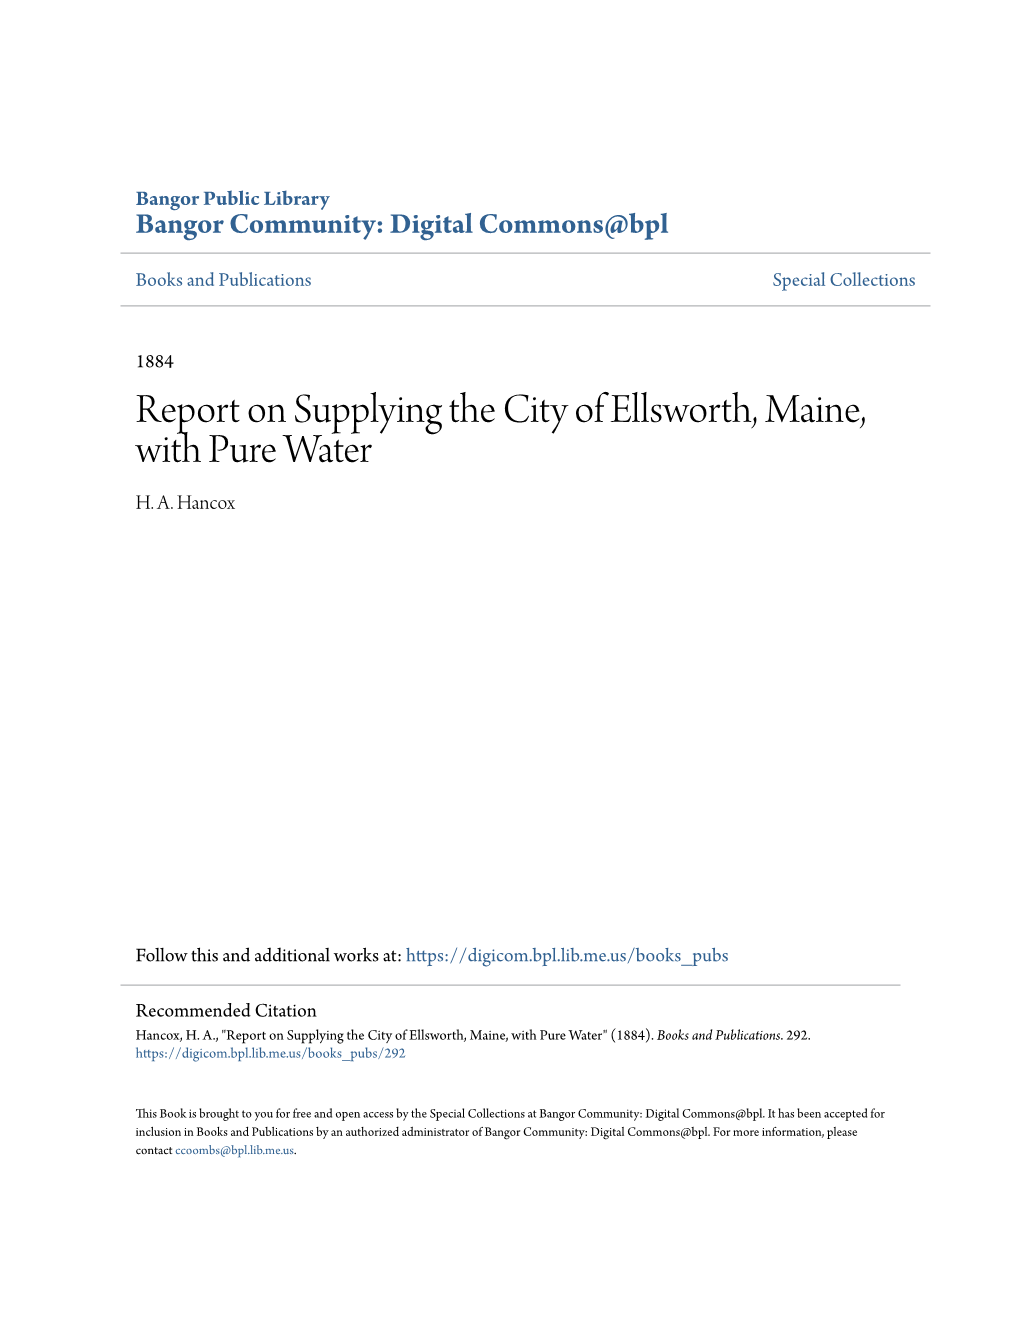 Report on Supplying the City of Ellsworth, Maine, with Pure Water H